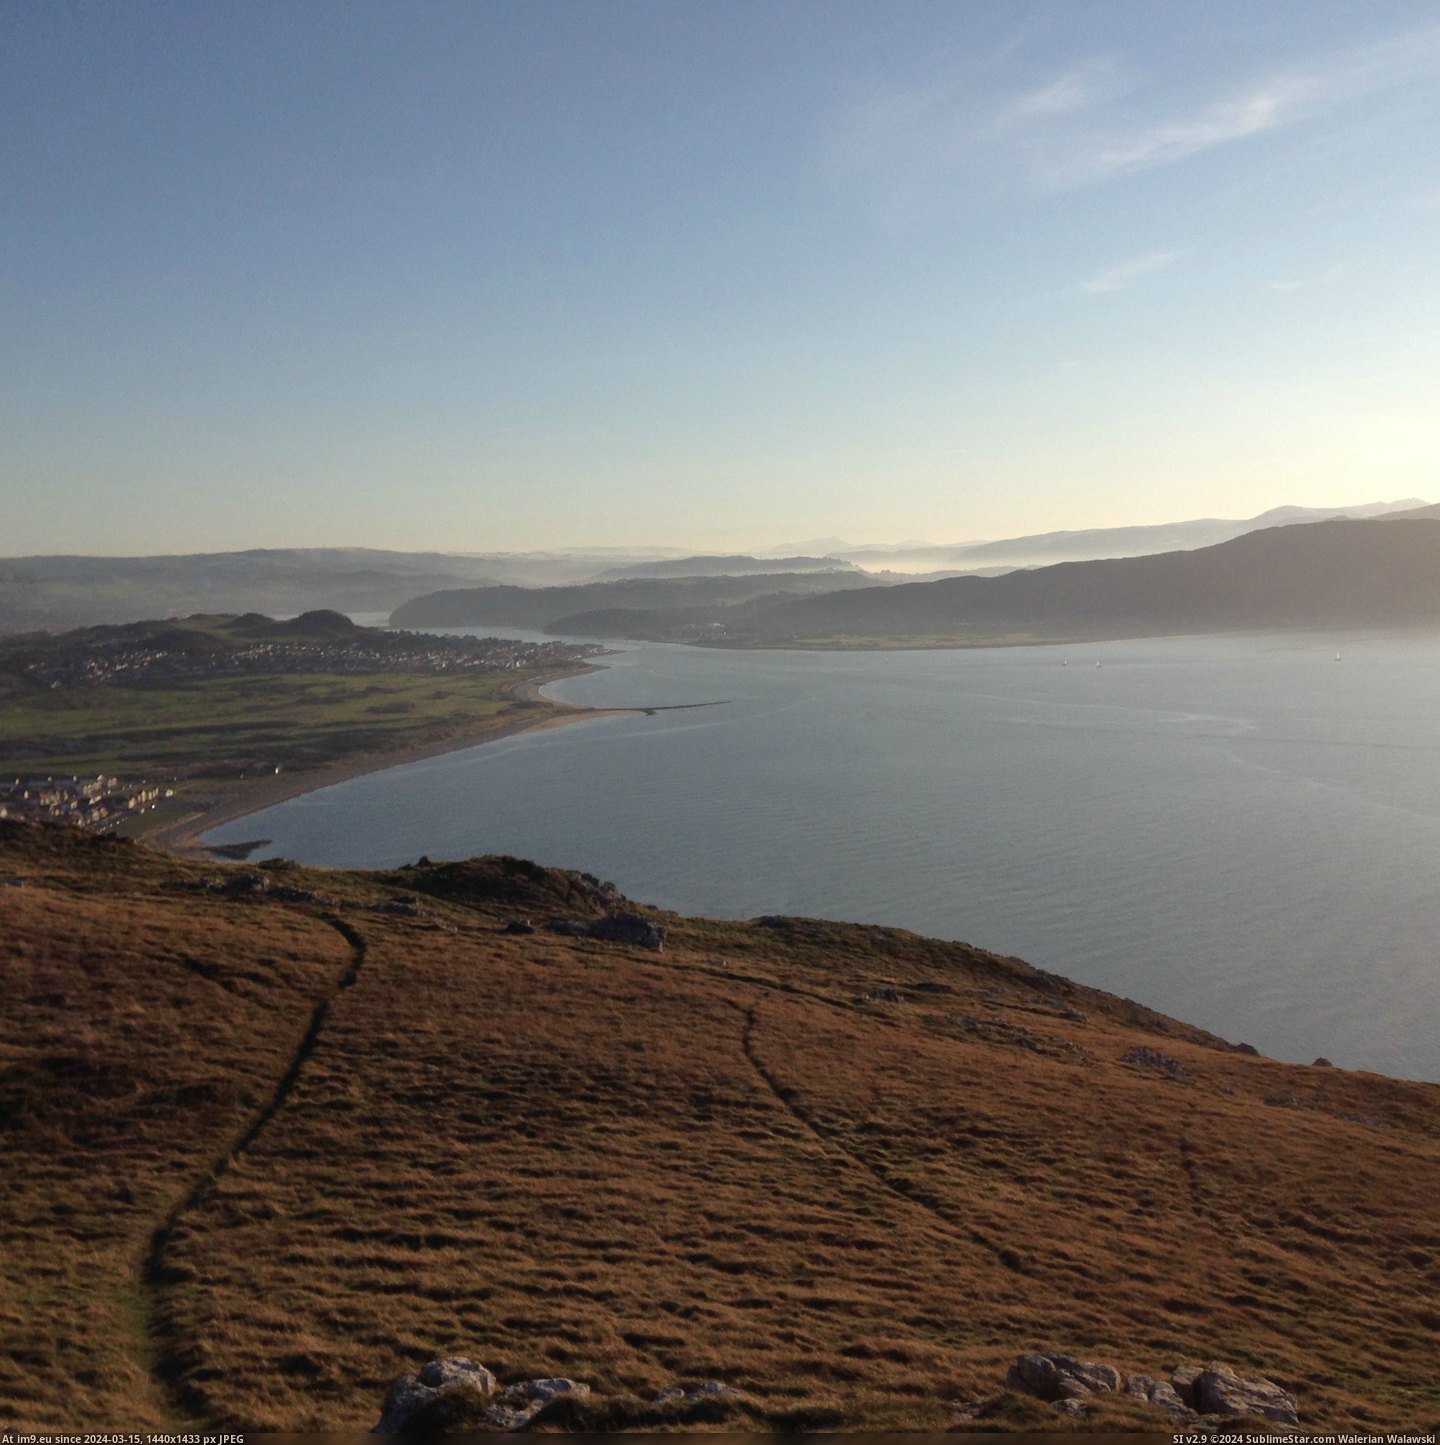 #Great #Top #Justice #Wales #640x1136 #North #Camera [Earthporn] View from the top of the Great Orme in North Wales, wish I had a better camera to do the view justice [640x1136] Pic. (Изображение из альбом My r/EARTHPORN favs))